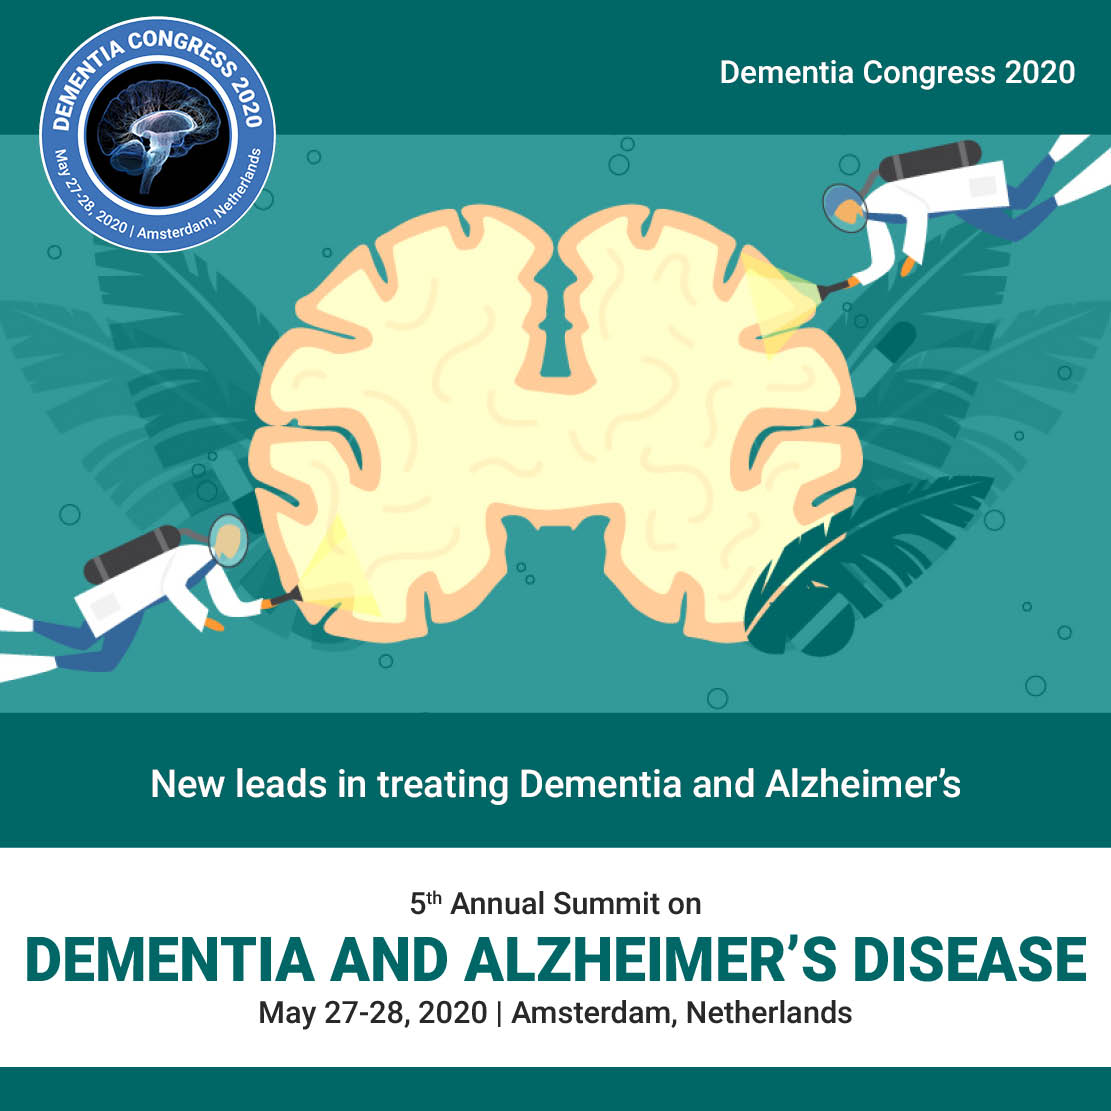 New leads in treating Dementia and Alzheimer